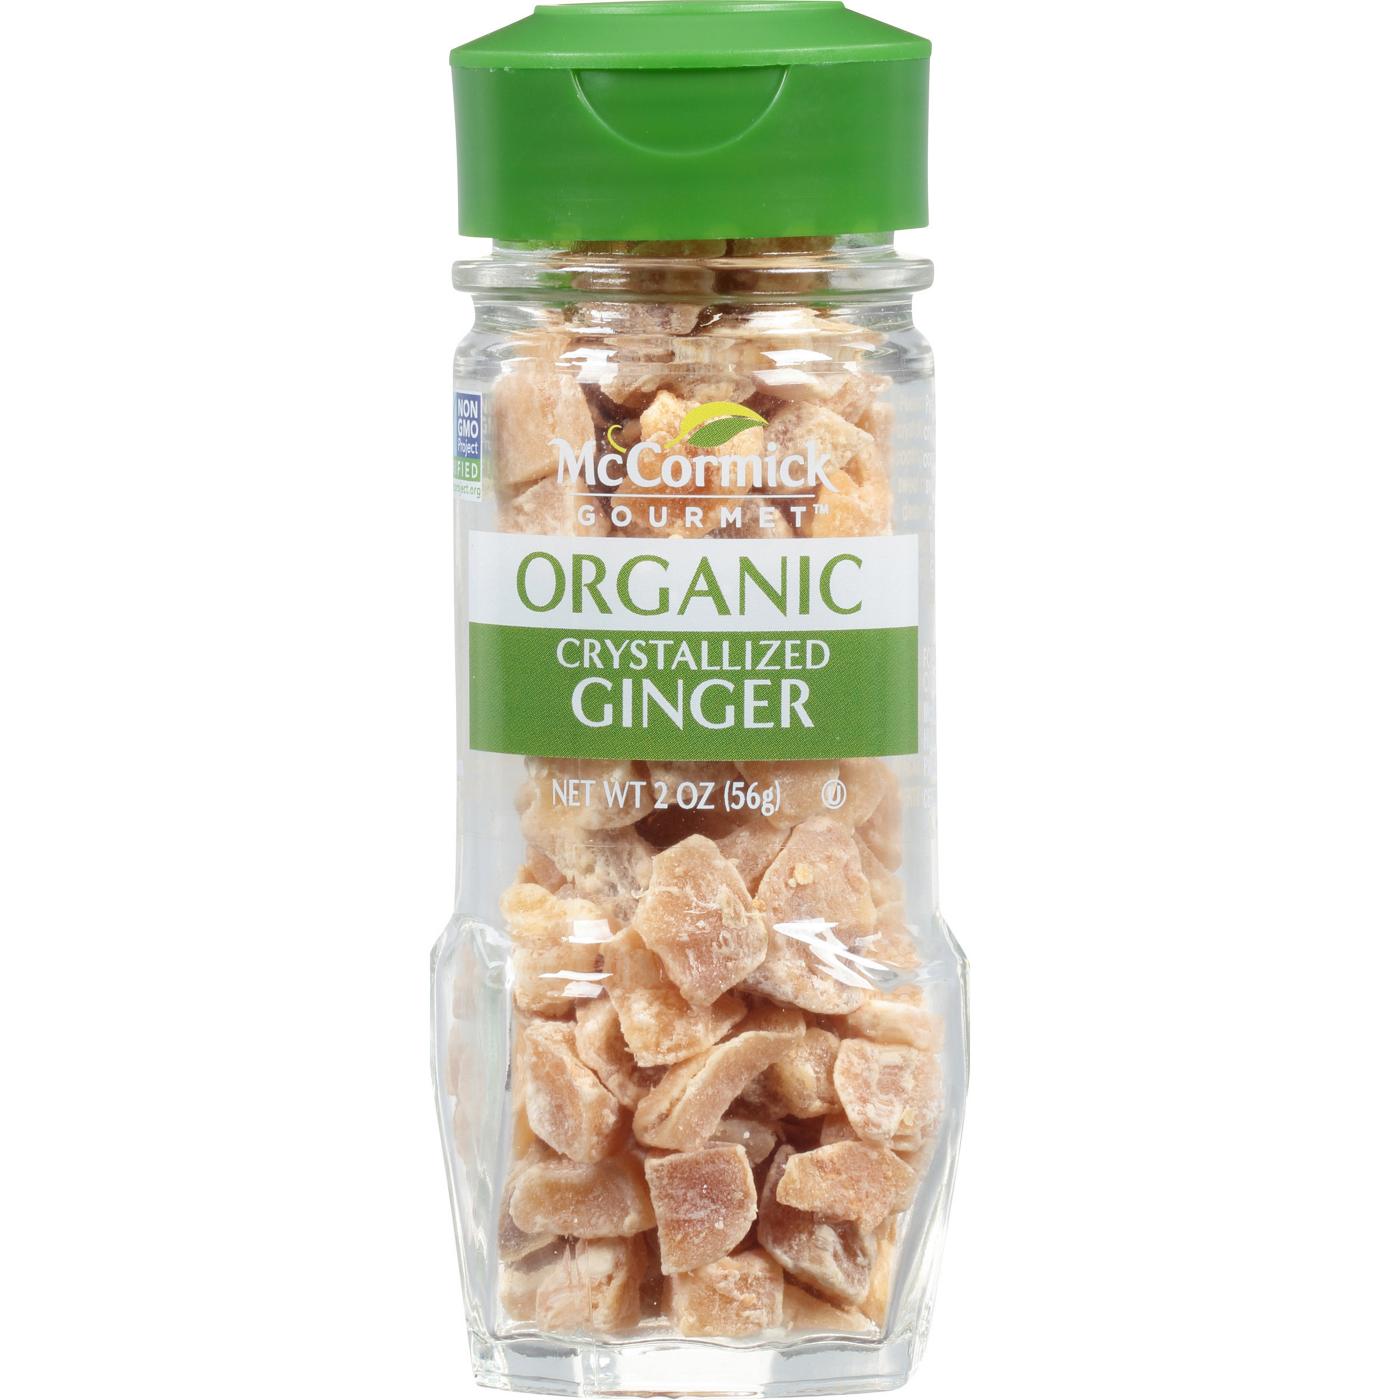 McCormick Gourmet Organic Crystallized Ginger; image 1 of 5